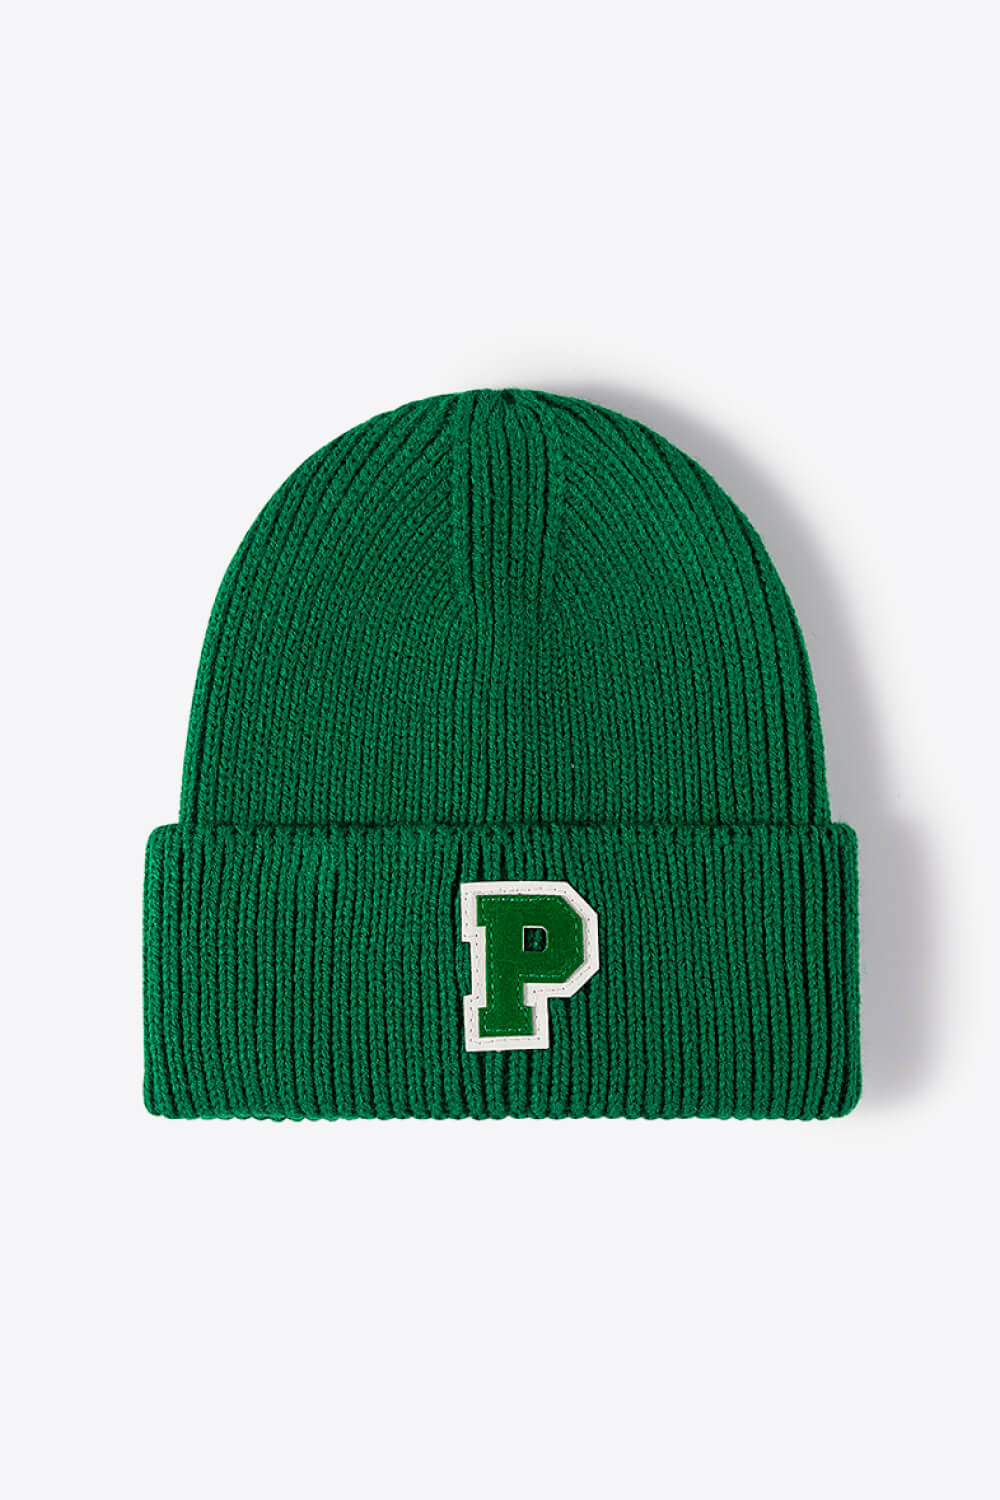 Letter Patch Cuffed Knit Beanie